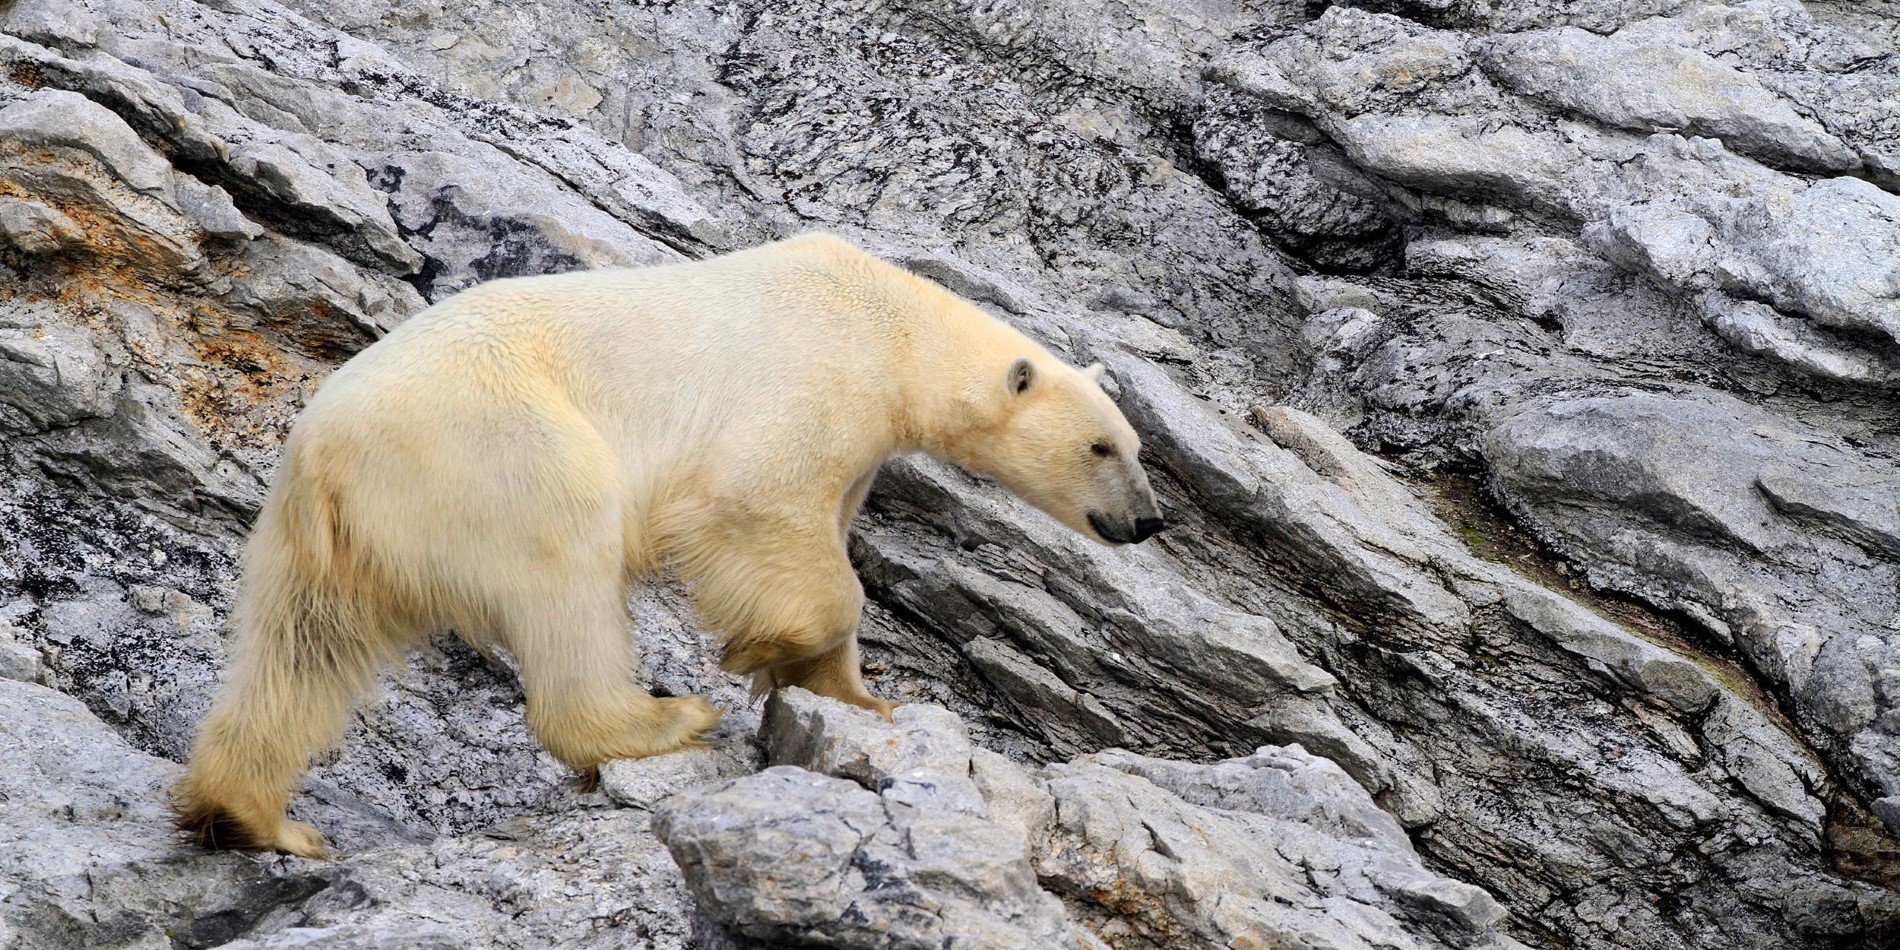 The King of the Arctic, the Polar Bear in Svalbard. 